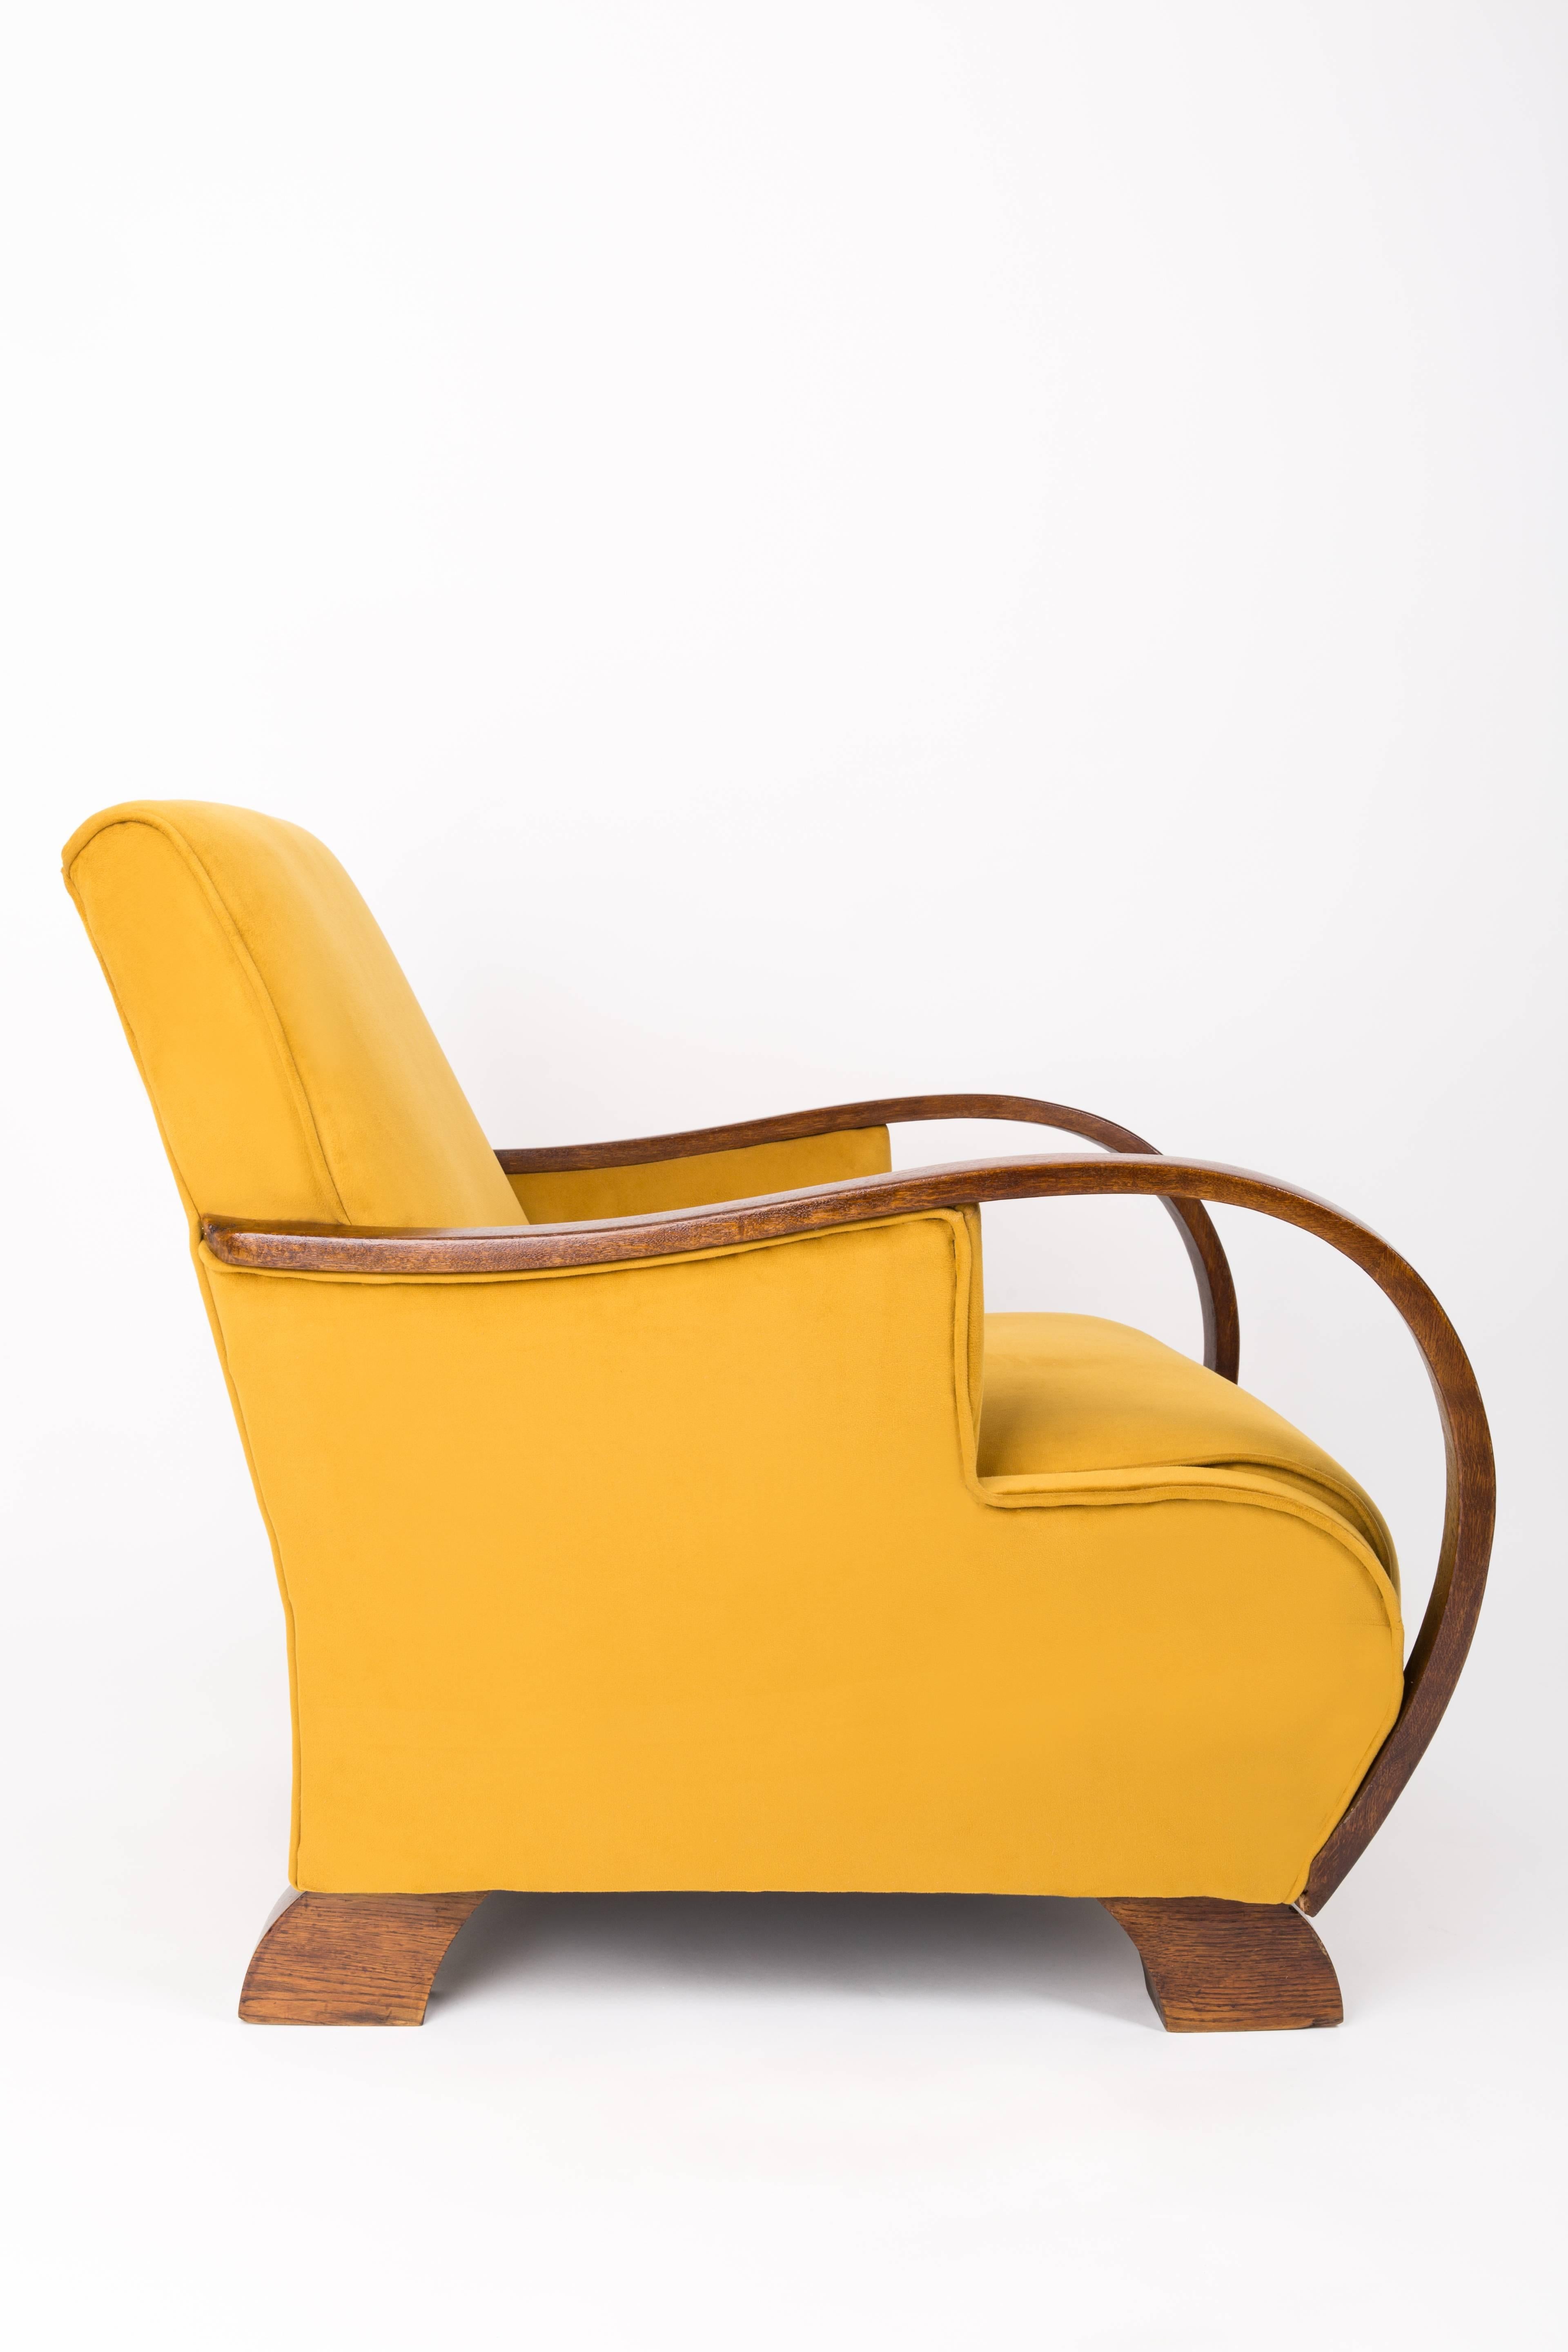 Hand-Crafted Art Deco, Vintage Yellow Big Armchair, 1920s For Sale